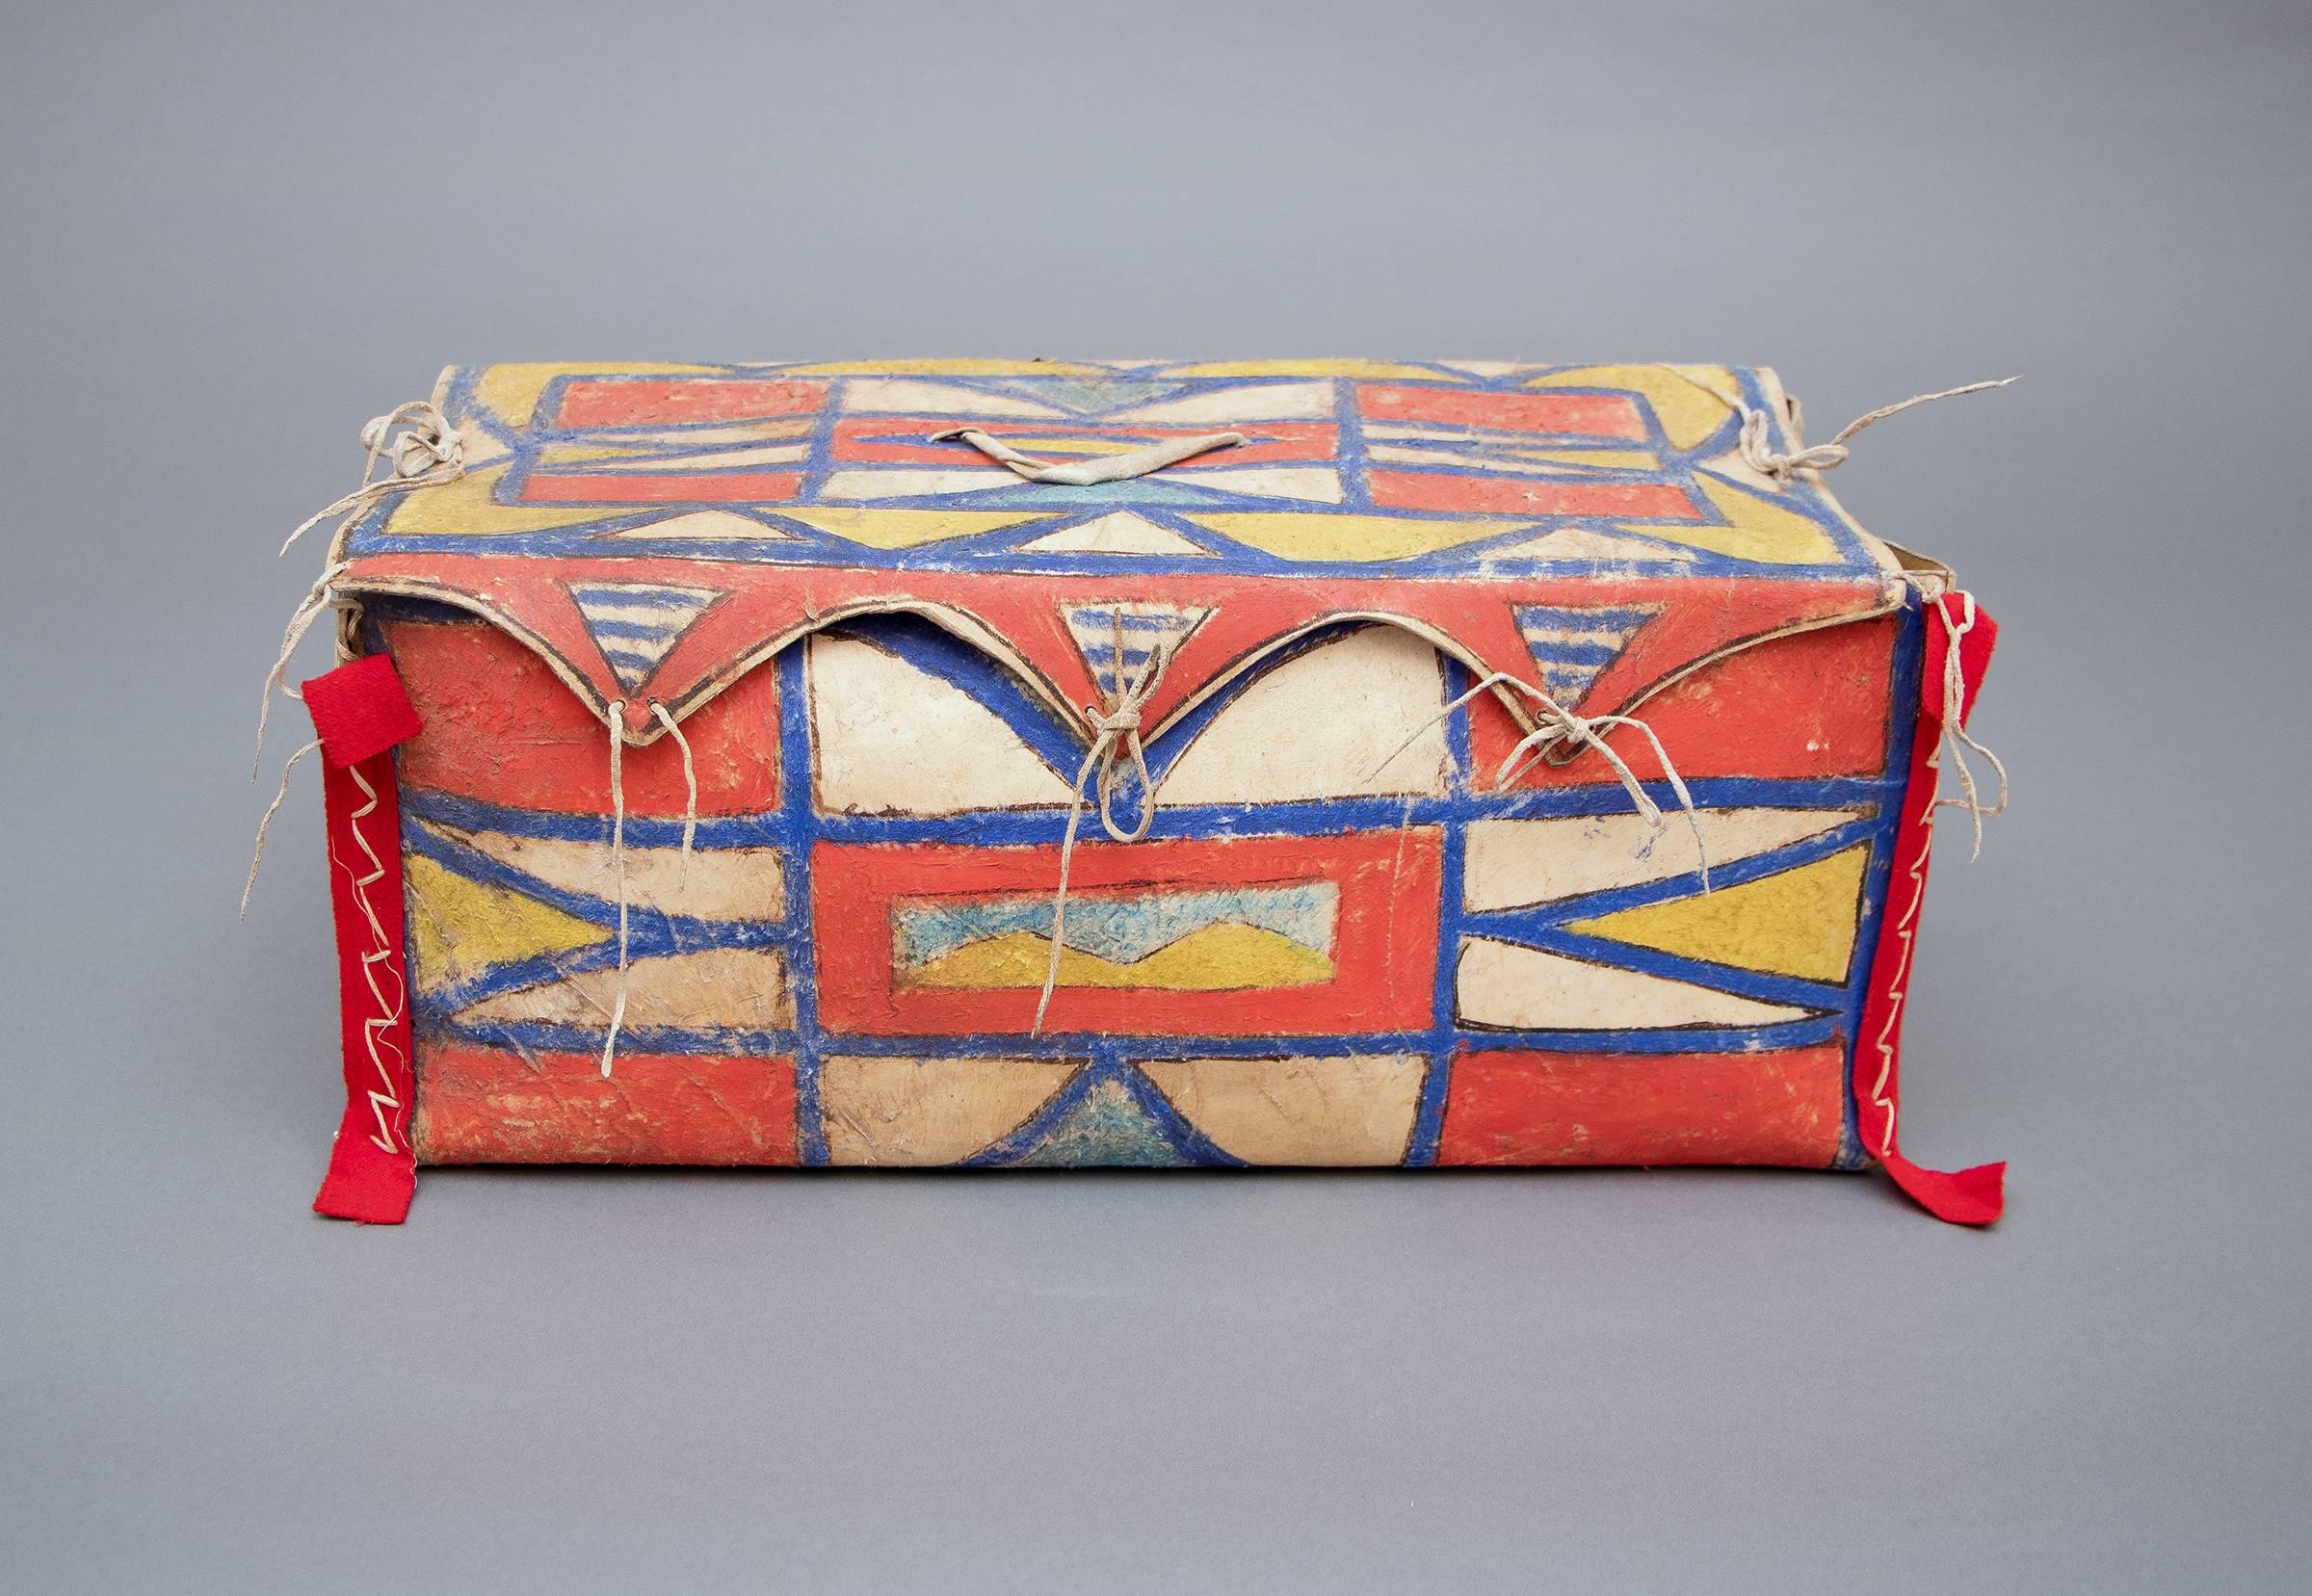 A rare box form constructed of rawhide and intricately painted in an abstract design with natural pigments and red trade cloth.
This was created by a North American Indian living in the Plateau cultural area - encompassing portions of what is now